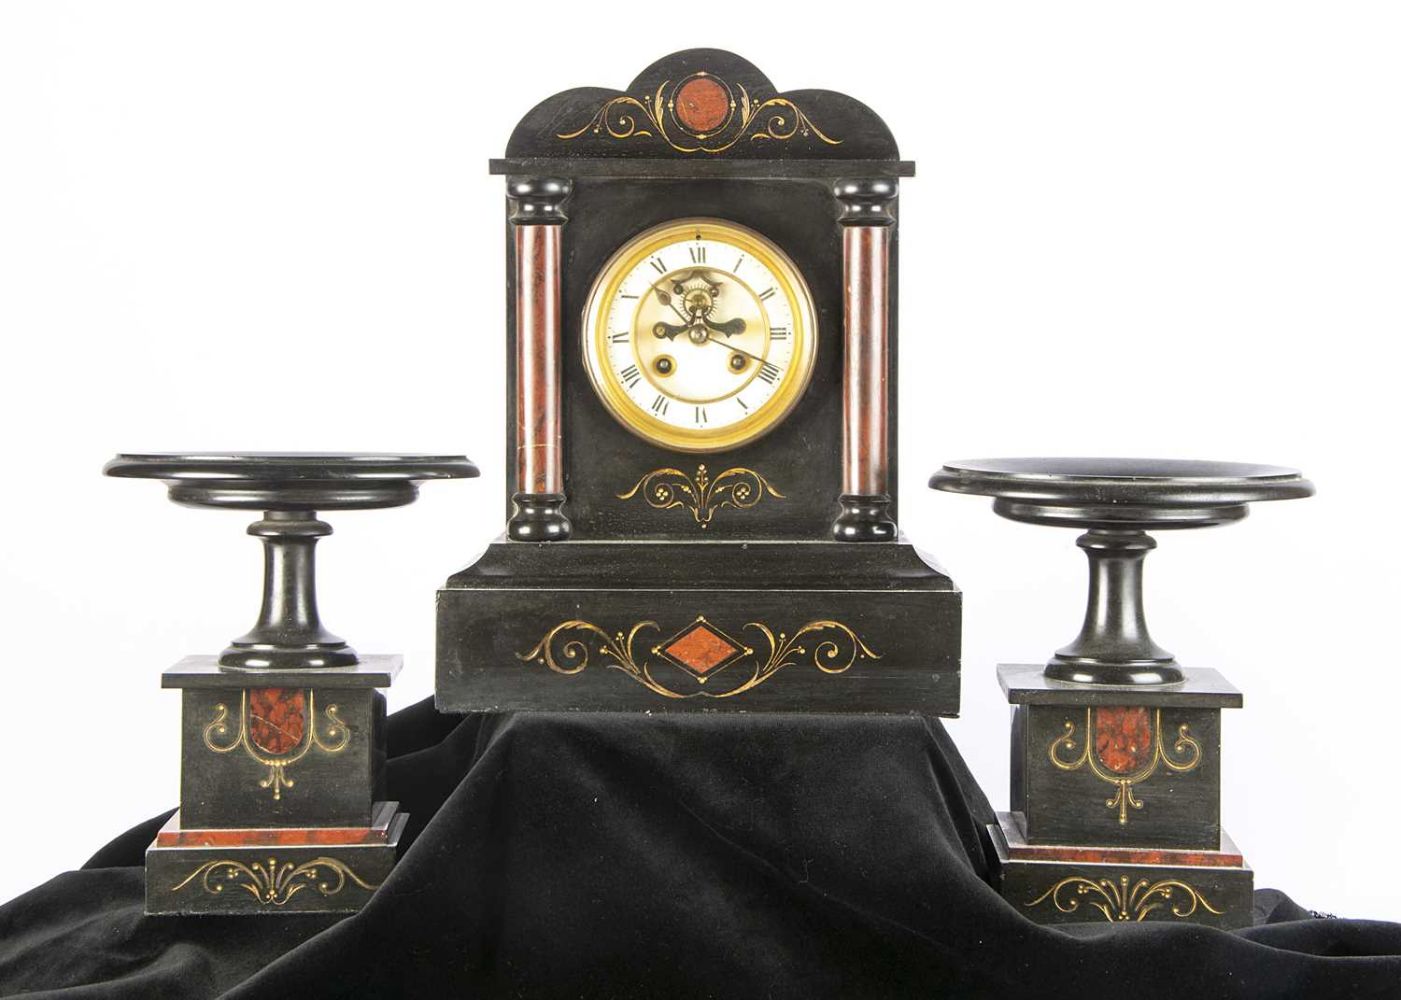 Watch and Clock Auction